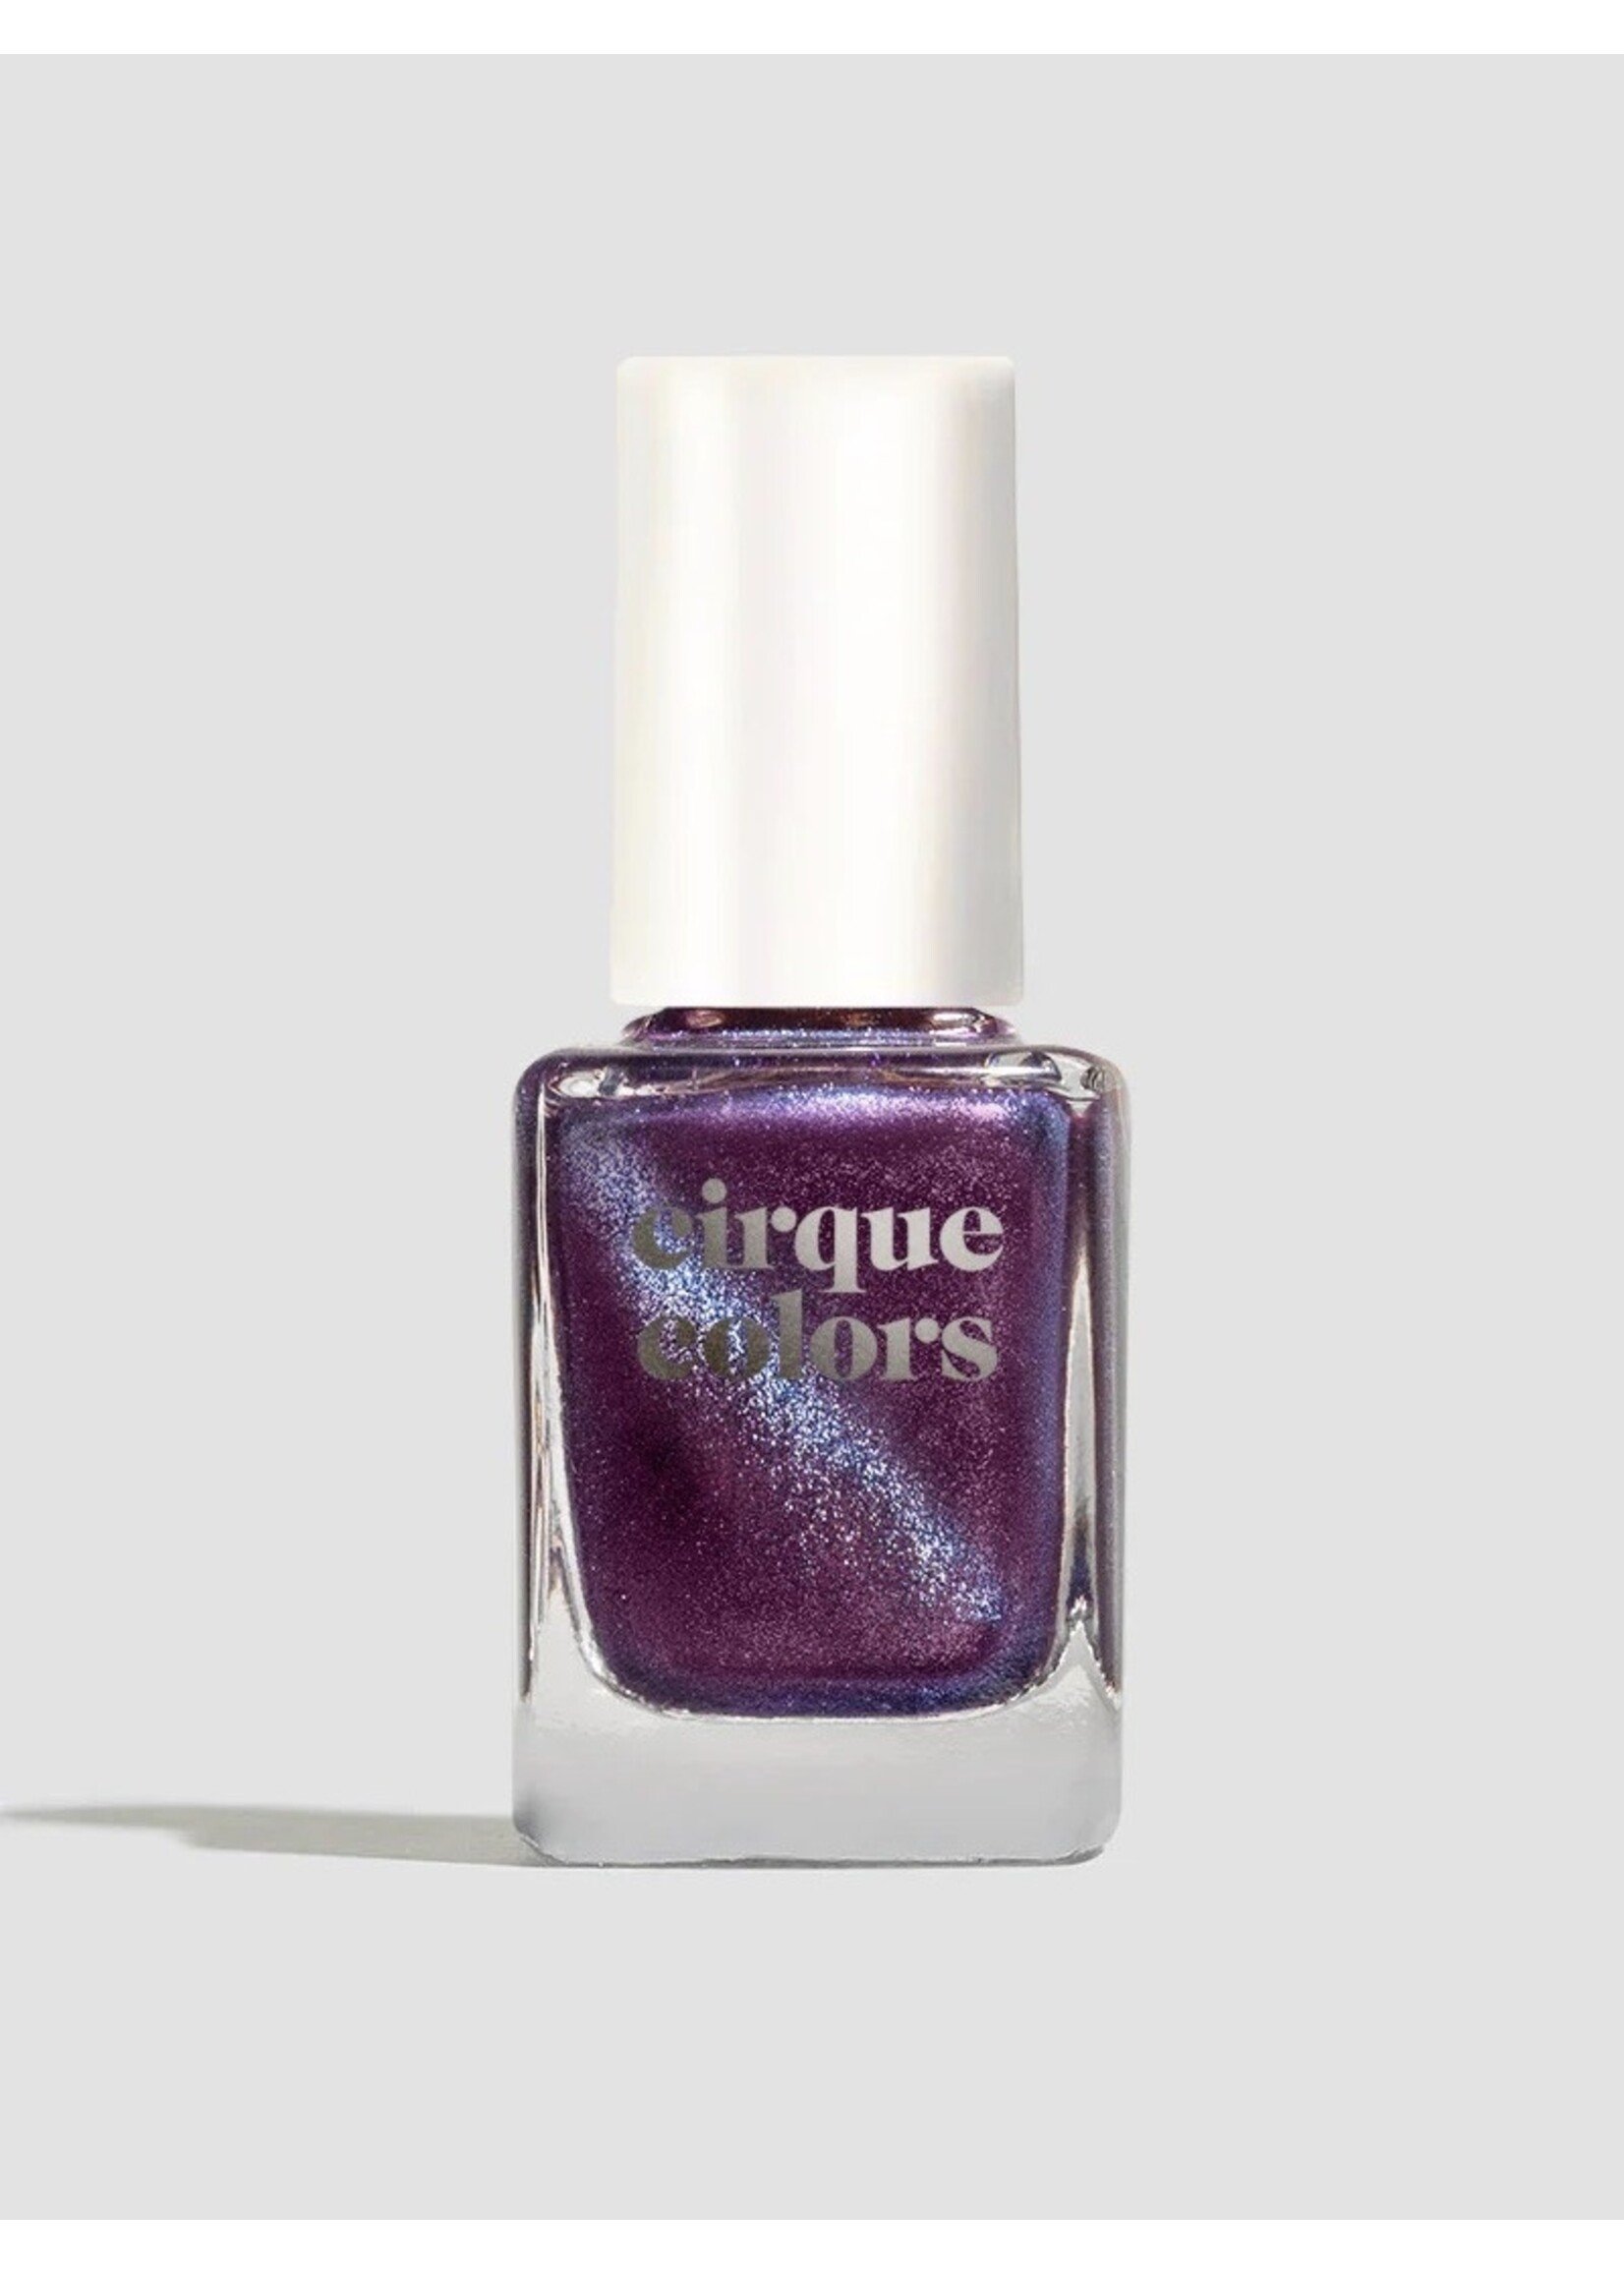 Cirque Colors Nail polishes "Heavenly Bodies" by Cirque Colors